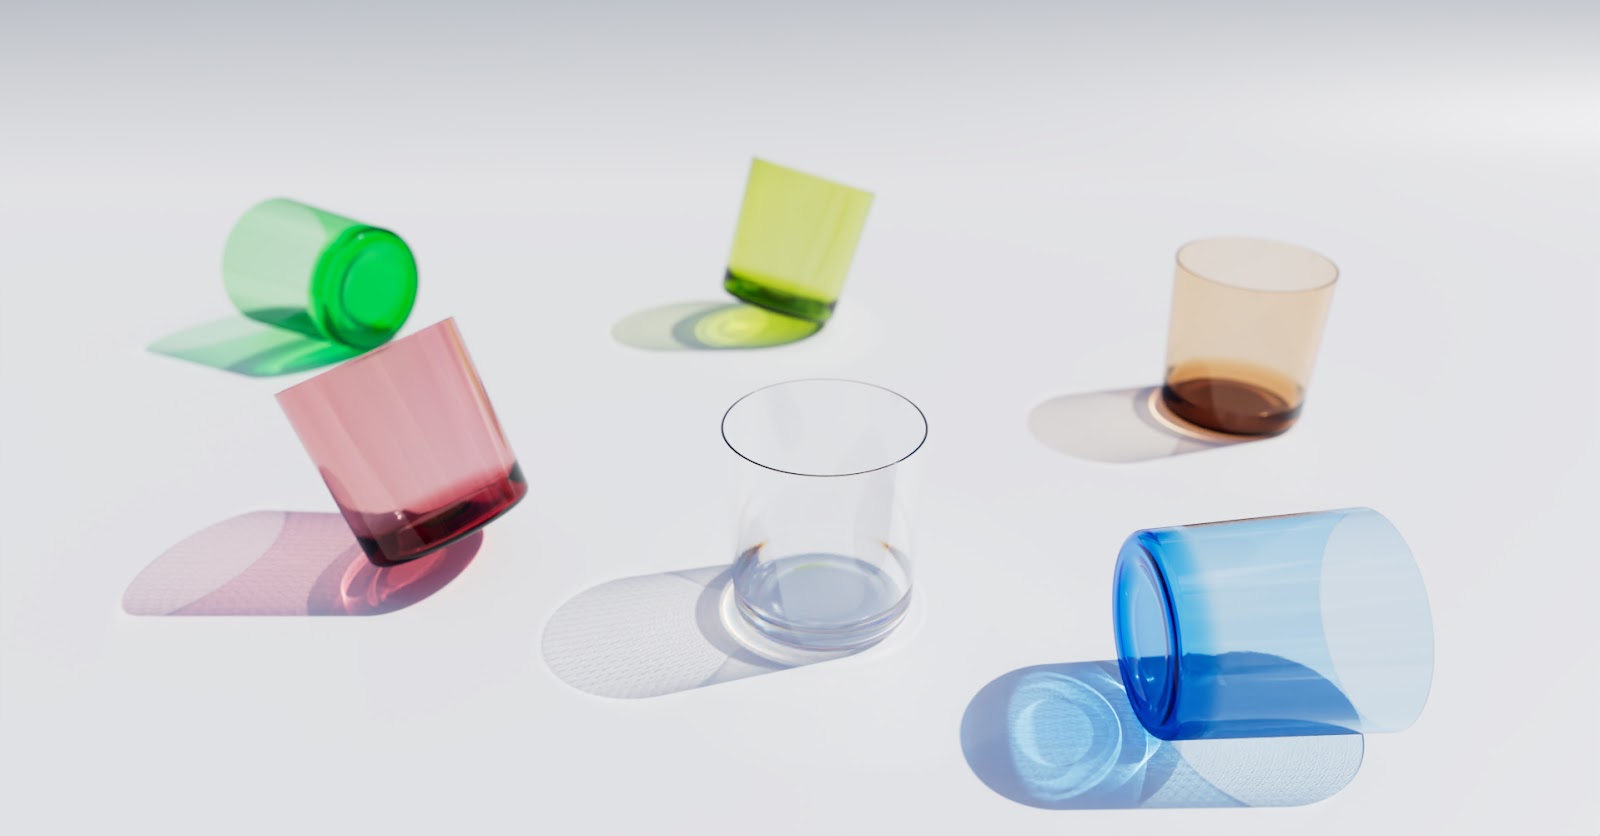 Multiple colored glasses with caustics